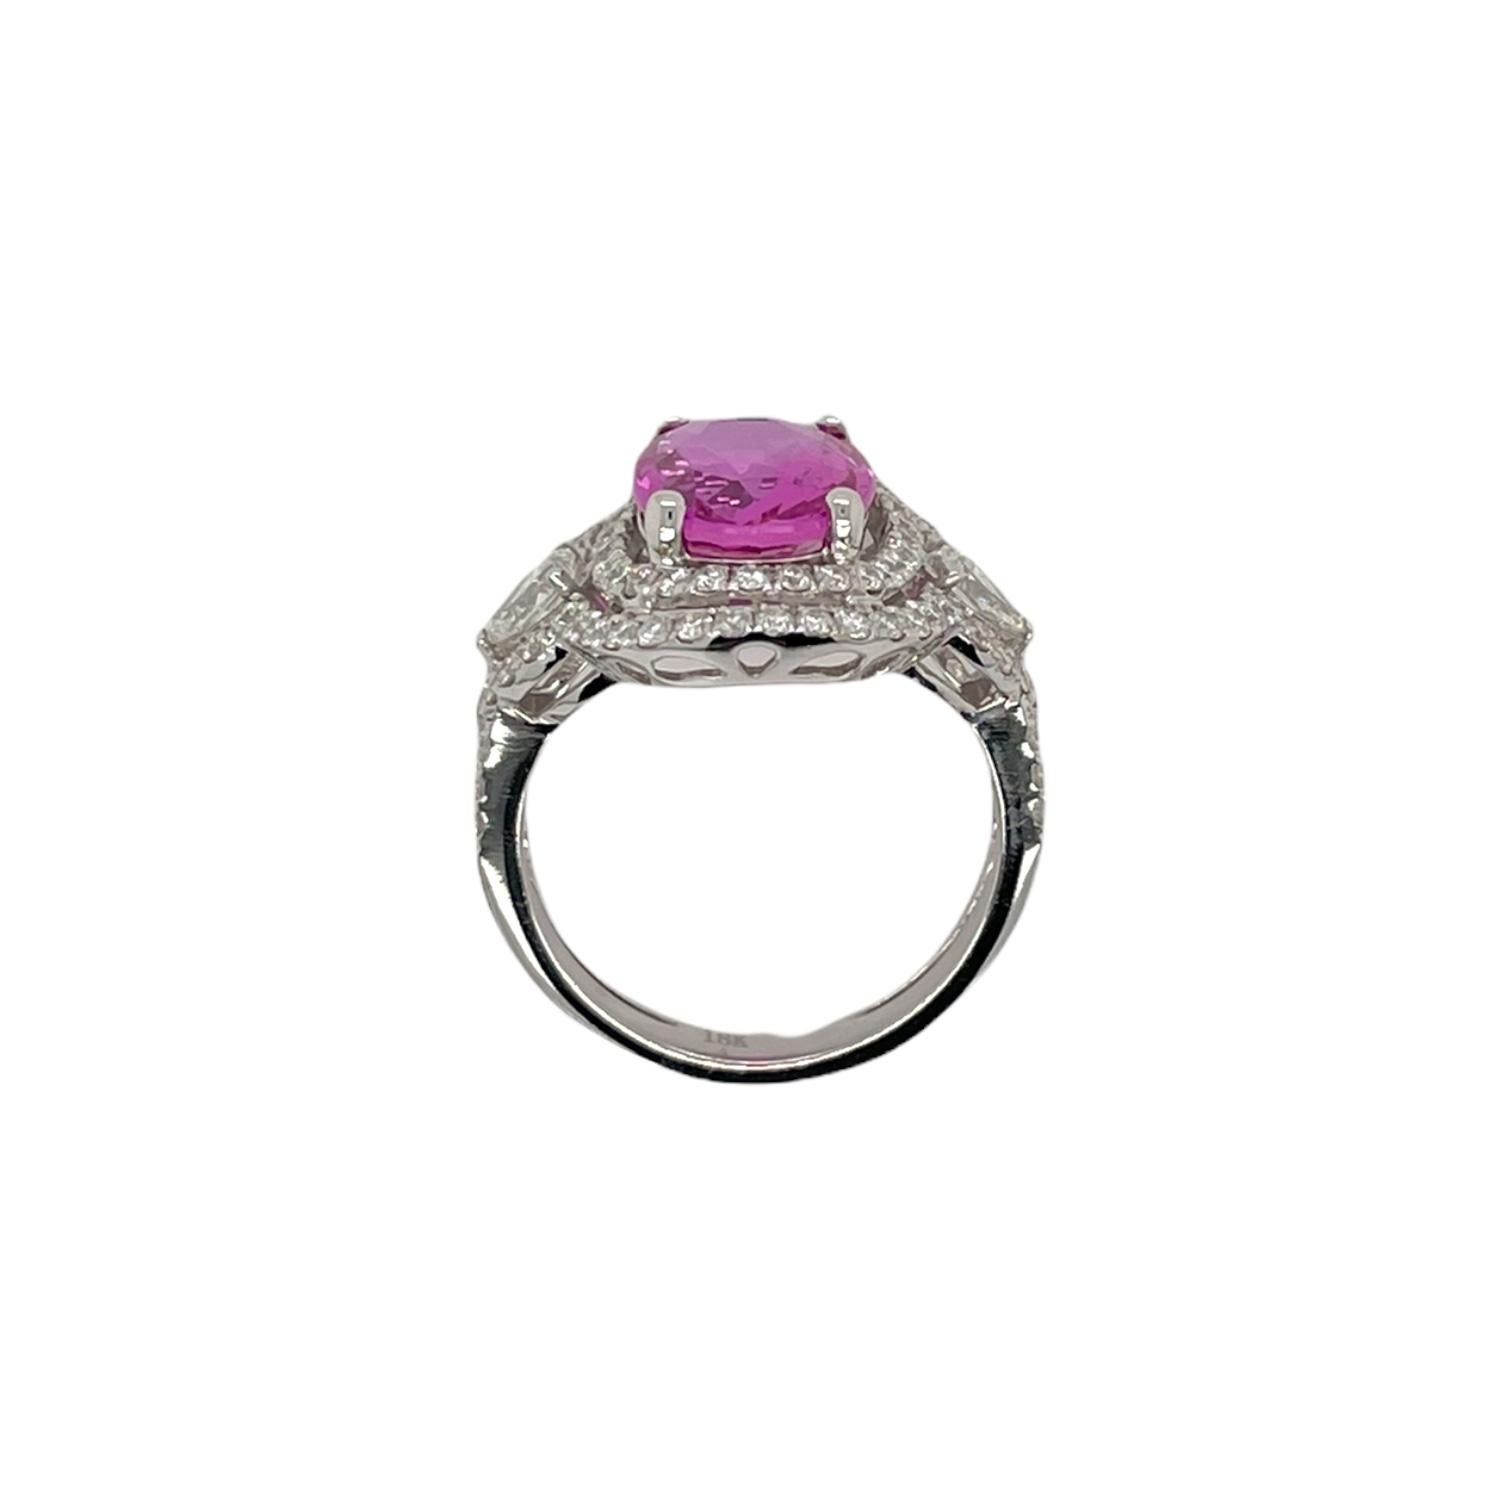 Oval Cut GIA Certified Pink Sapphire & Diamond Ring in 18K White Gold